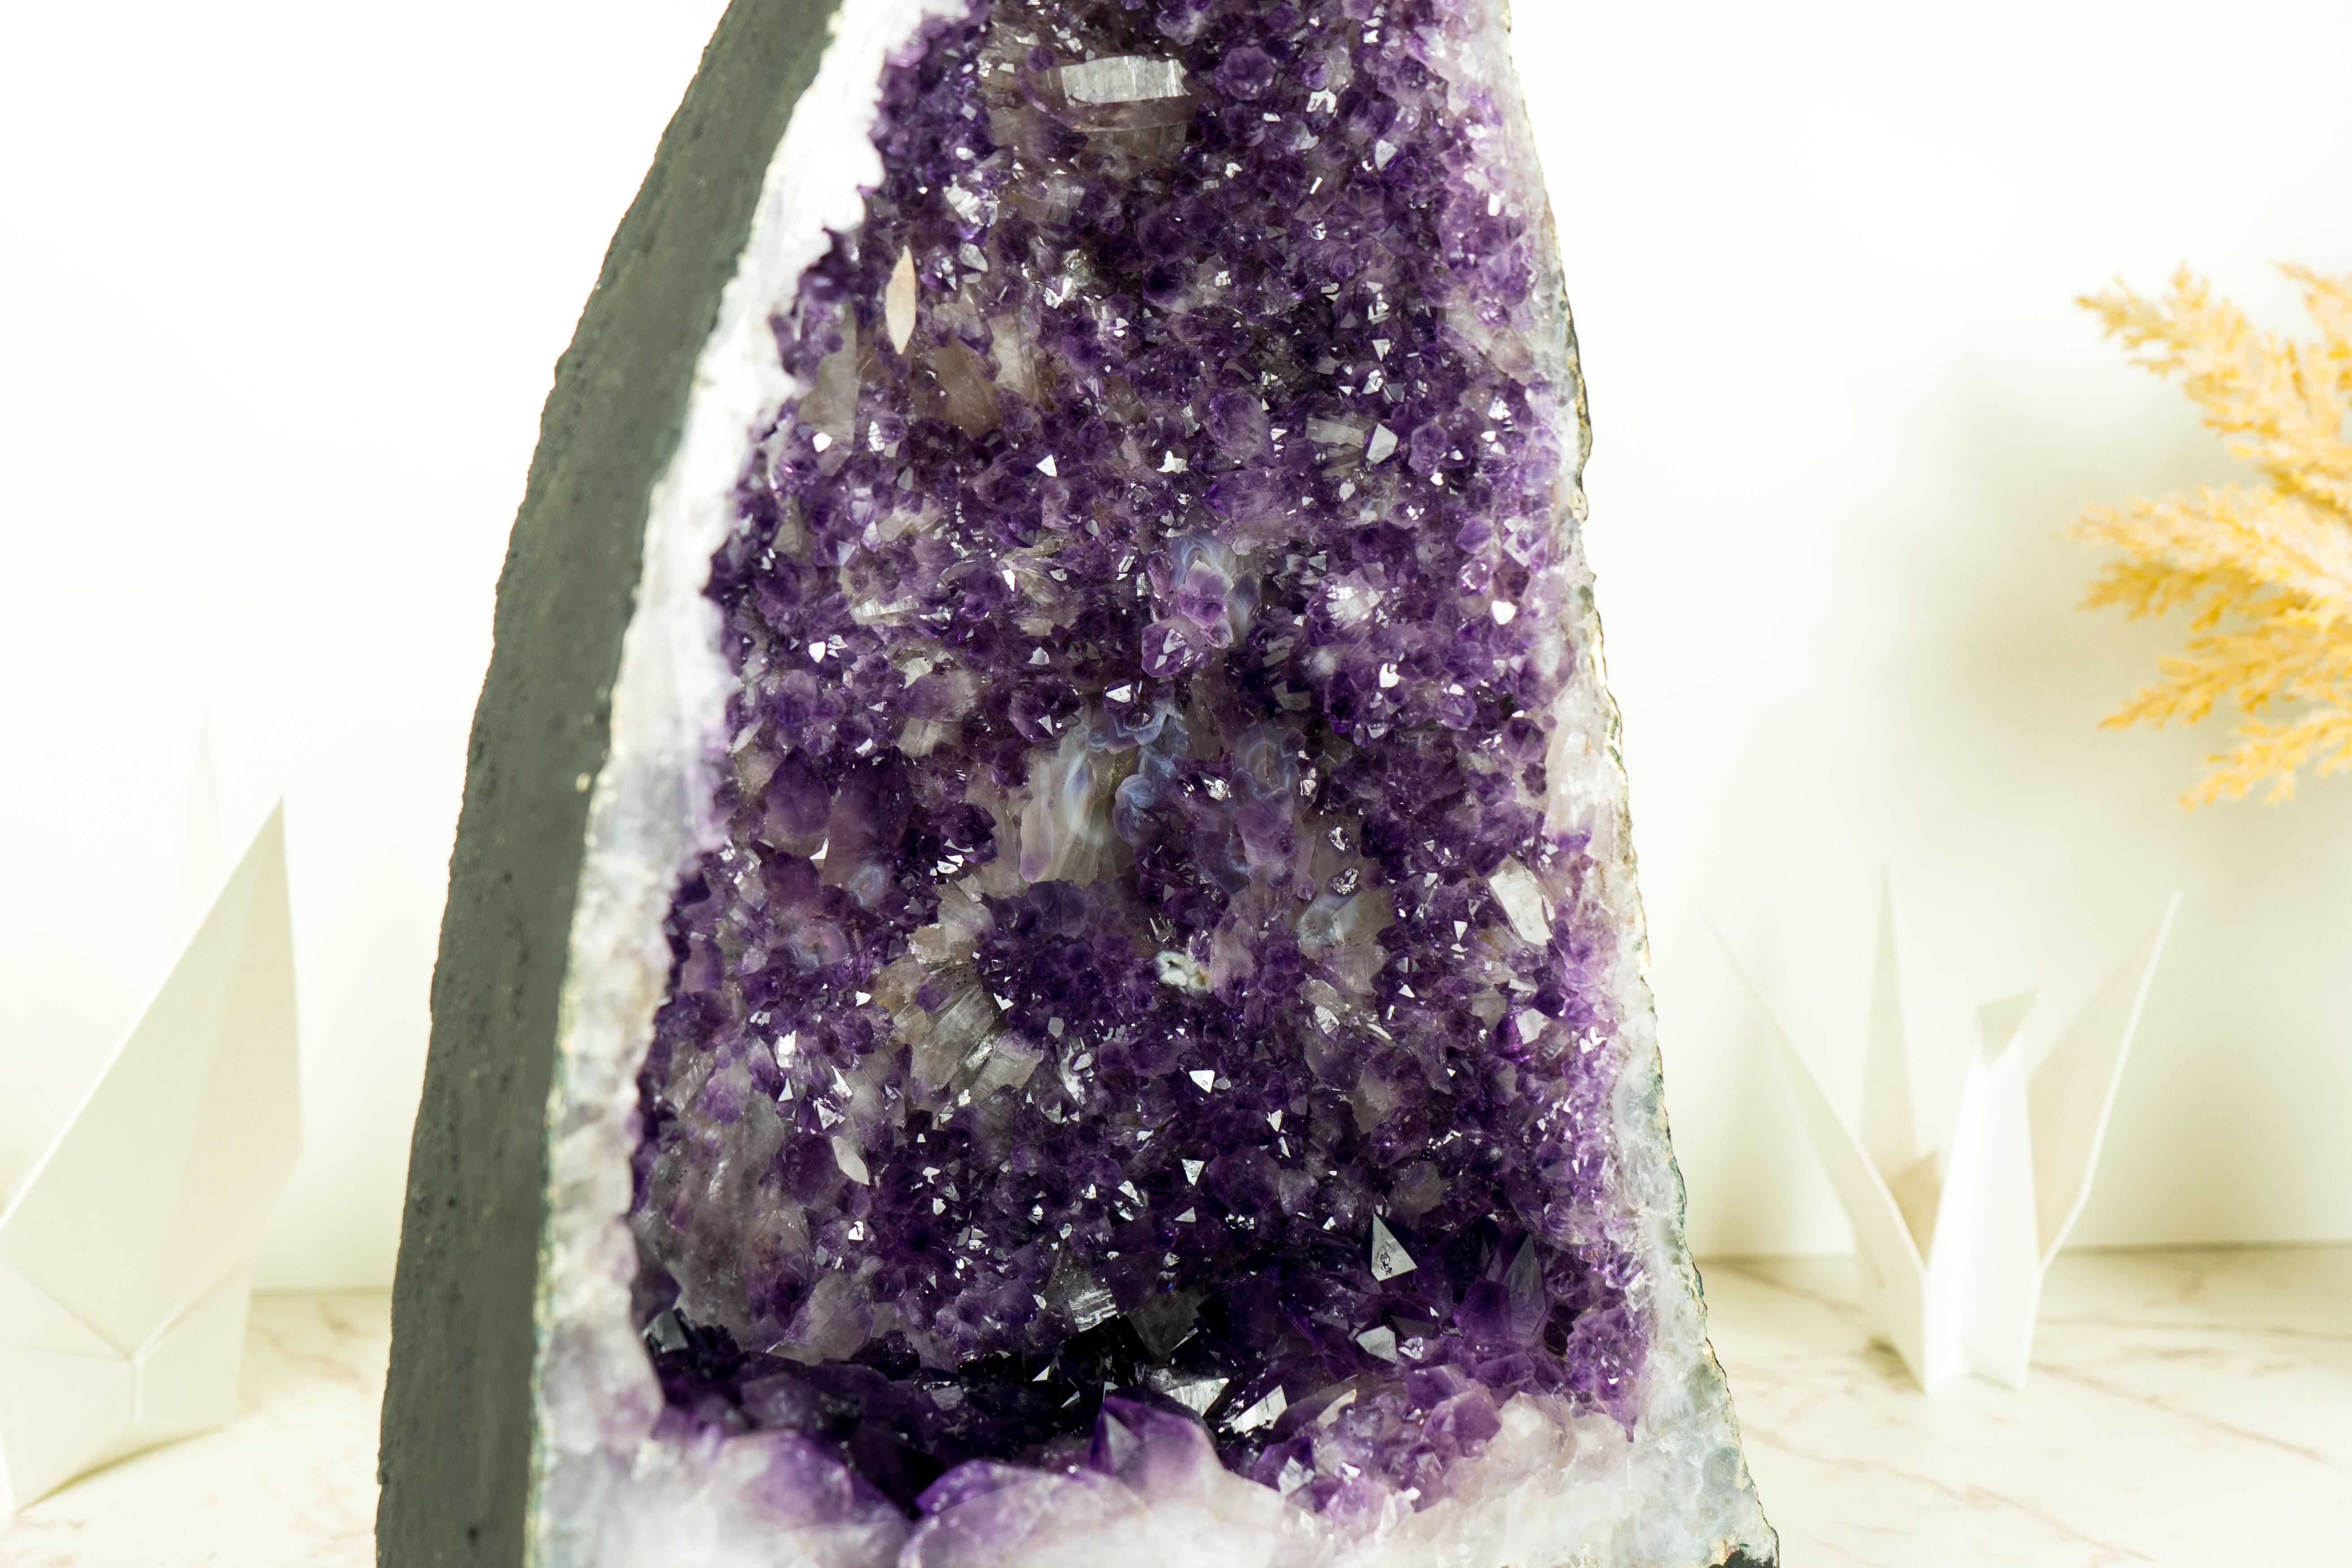 An Amethyst Geode that brings rarely seen dual-zoned purple Amethyst druzy, gorgeous aesthetics, and rare double-terminated calcite inclusions, this is a piece of natural artistry. This geode is a centerpiece that will elevate your home or office